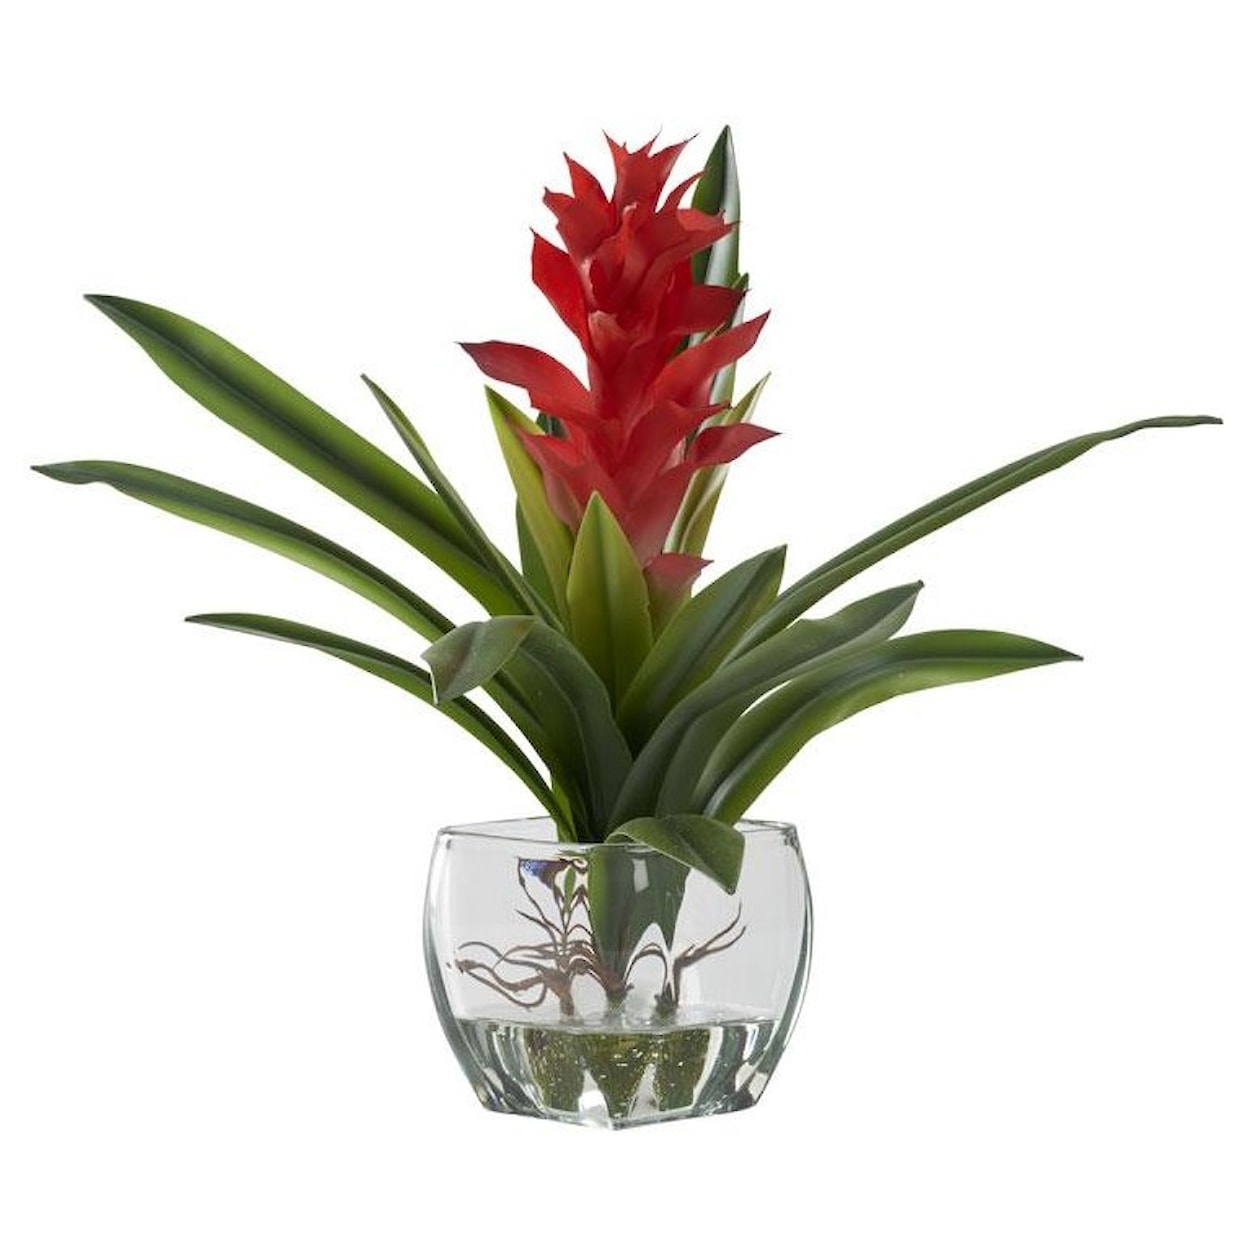 D&W Silks Florals and Botanicals Red Ginger Plant in Glass Cube